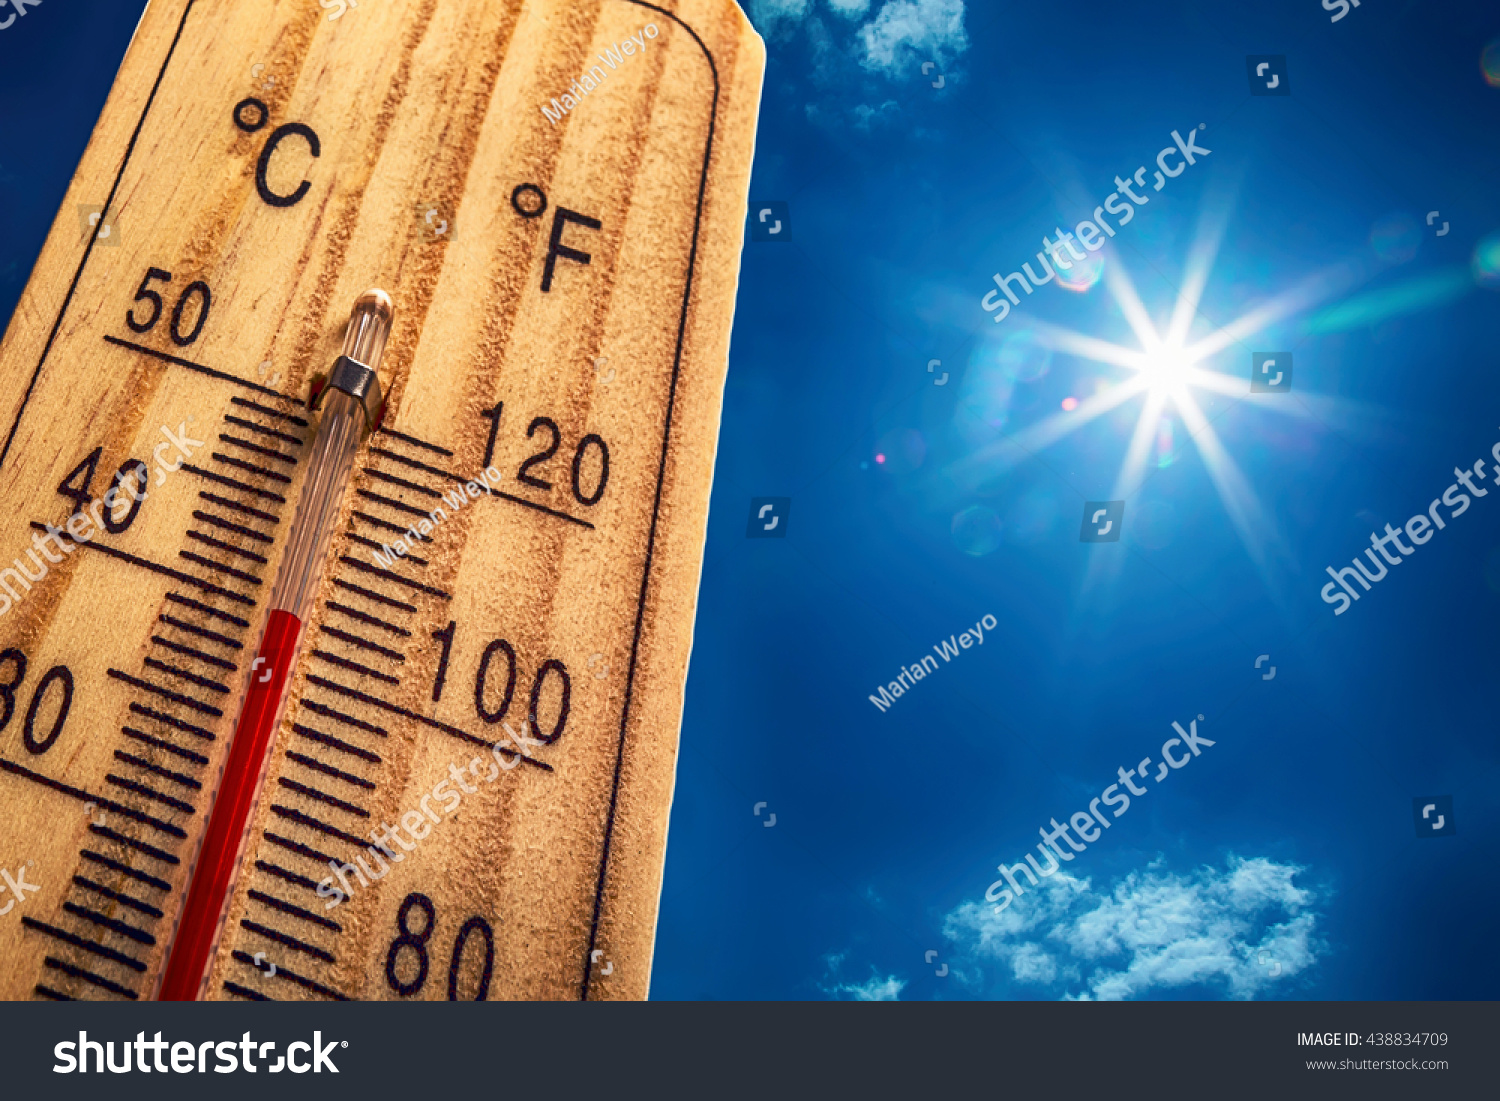 Thermometer Sun Sky 40 Degrees Hot Summer Day High Temperatures In